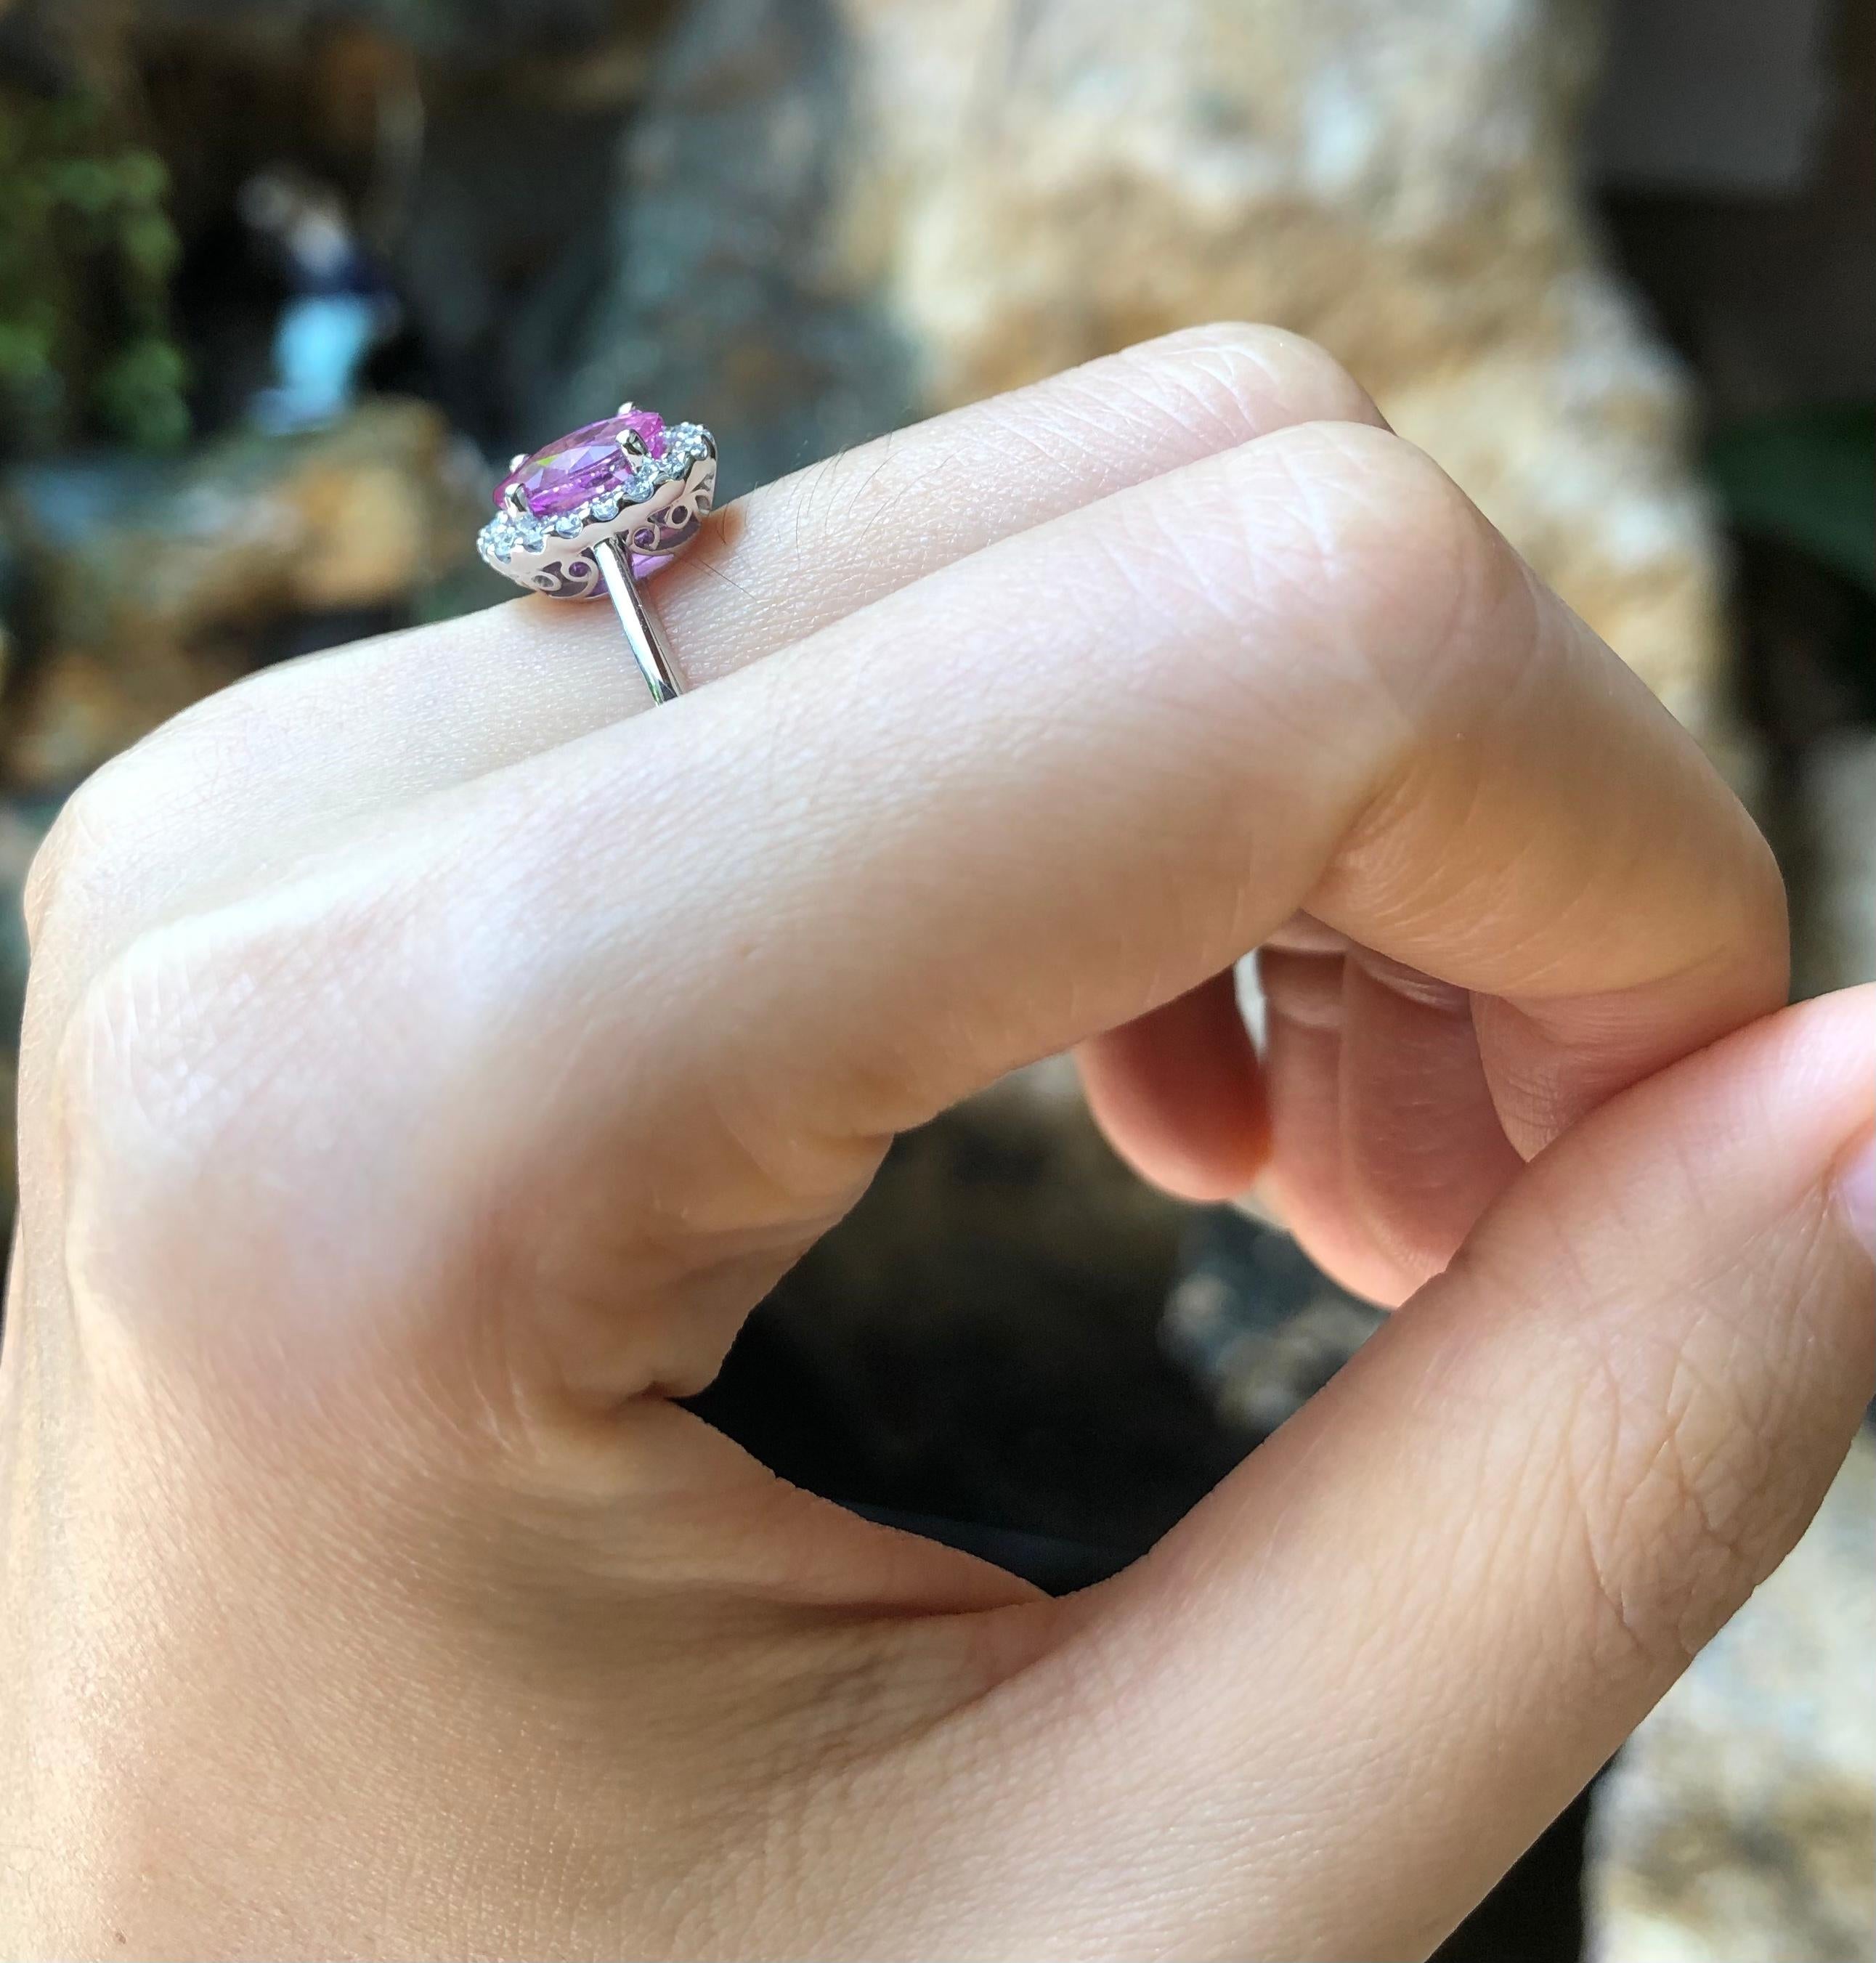 Pink Sapphire 1.78 carats with Diamond 0.21 carat Ring set in 18 Karat White Gold Settings

Width:  0.7 cm 
Length: 1.1 cm
Ring Size: 53
Total Weight: 3.92 grams

